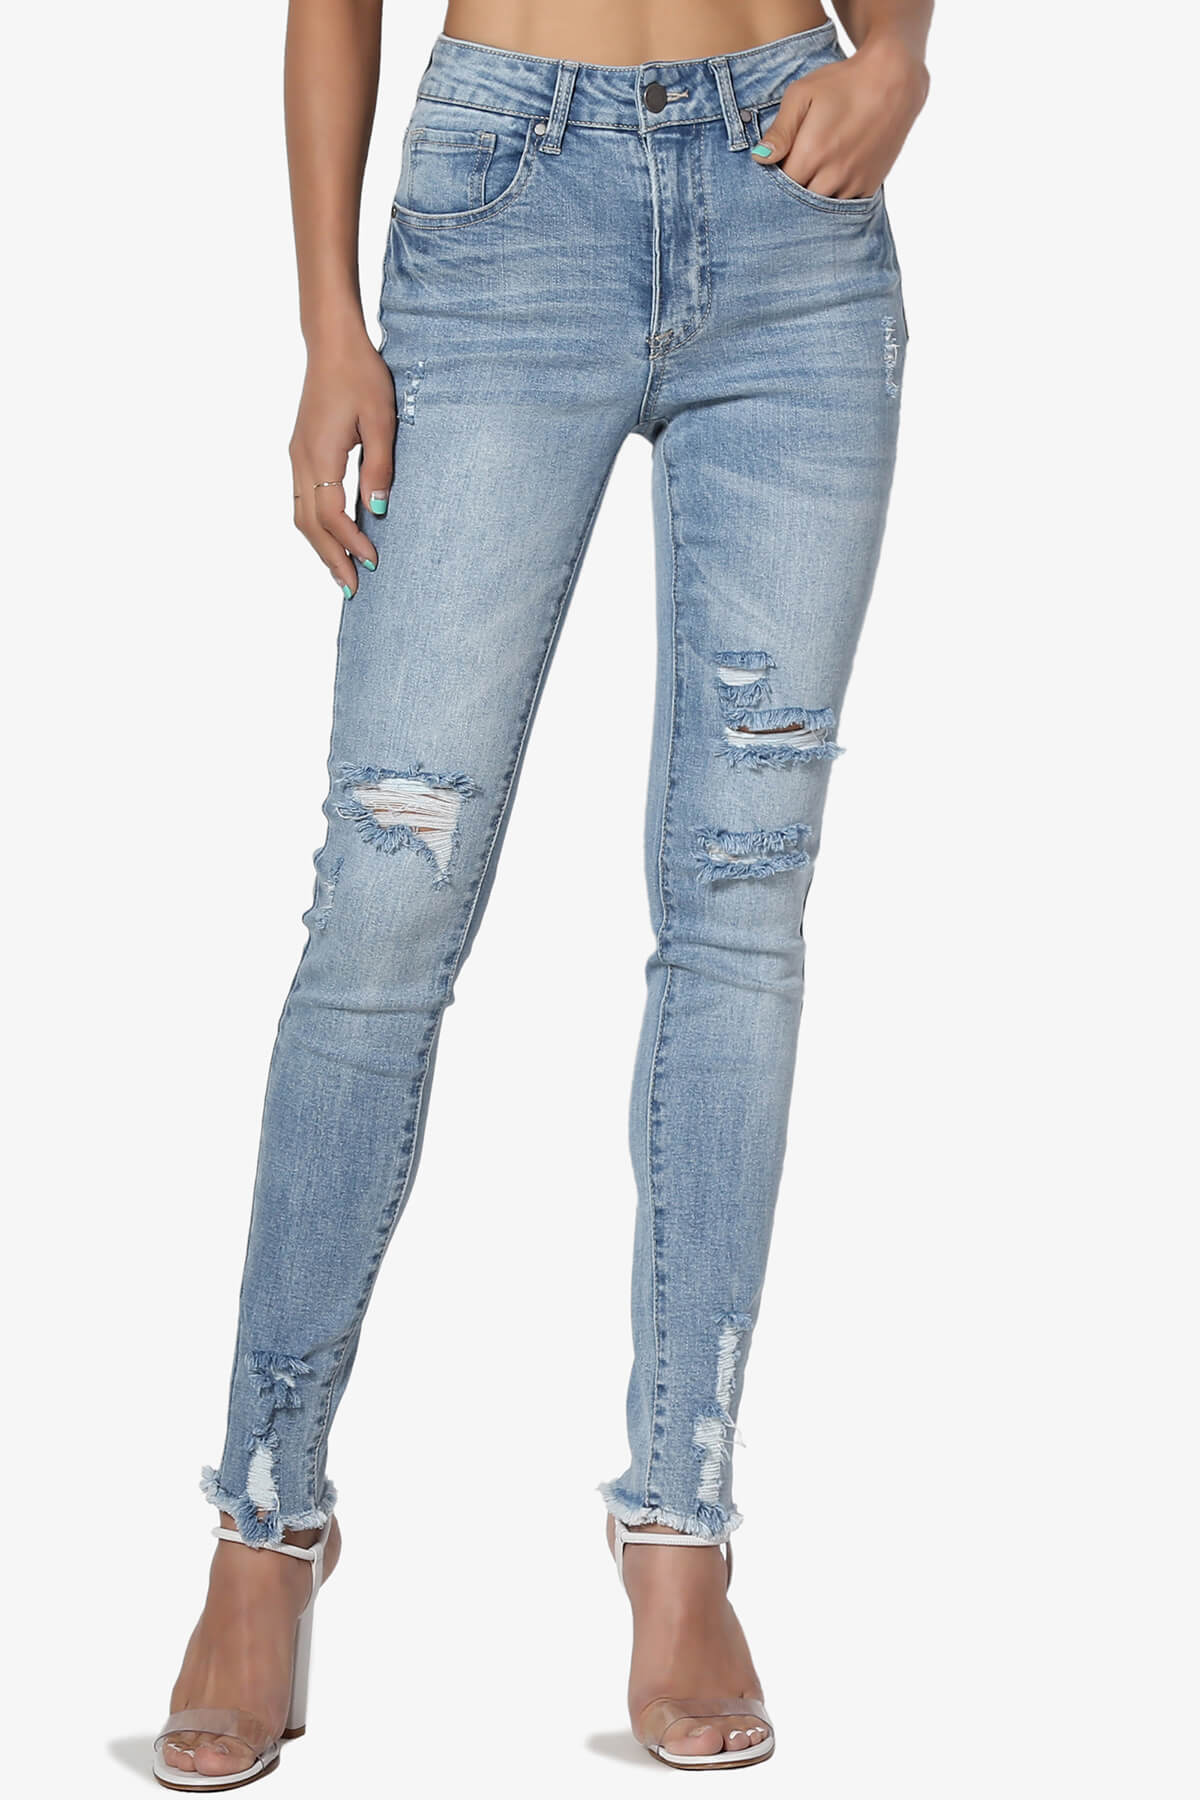 Load image into Gallery viewer, Rosalind Mid Rise Distressed Skinny Jeans LIGHT_1
